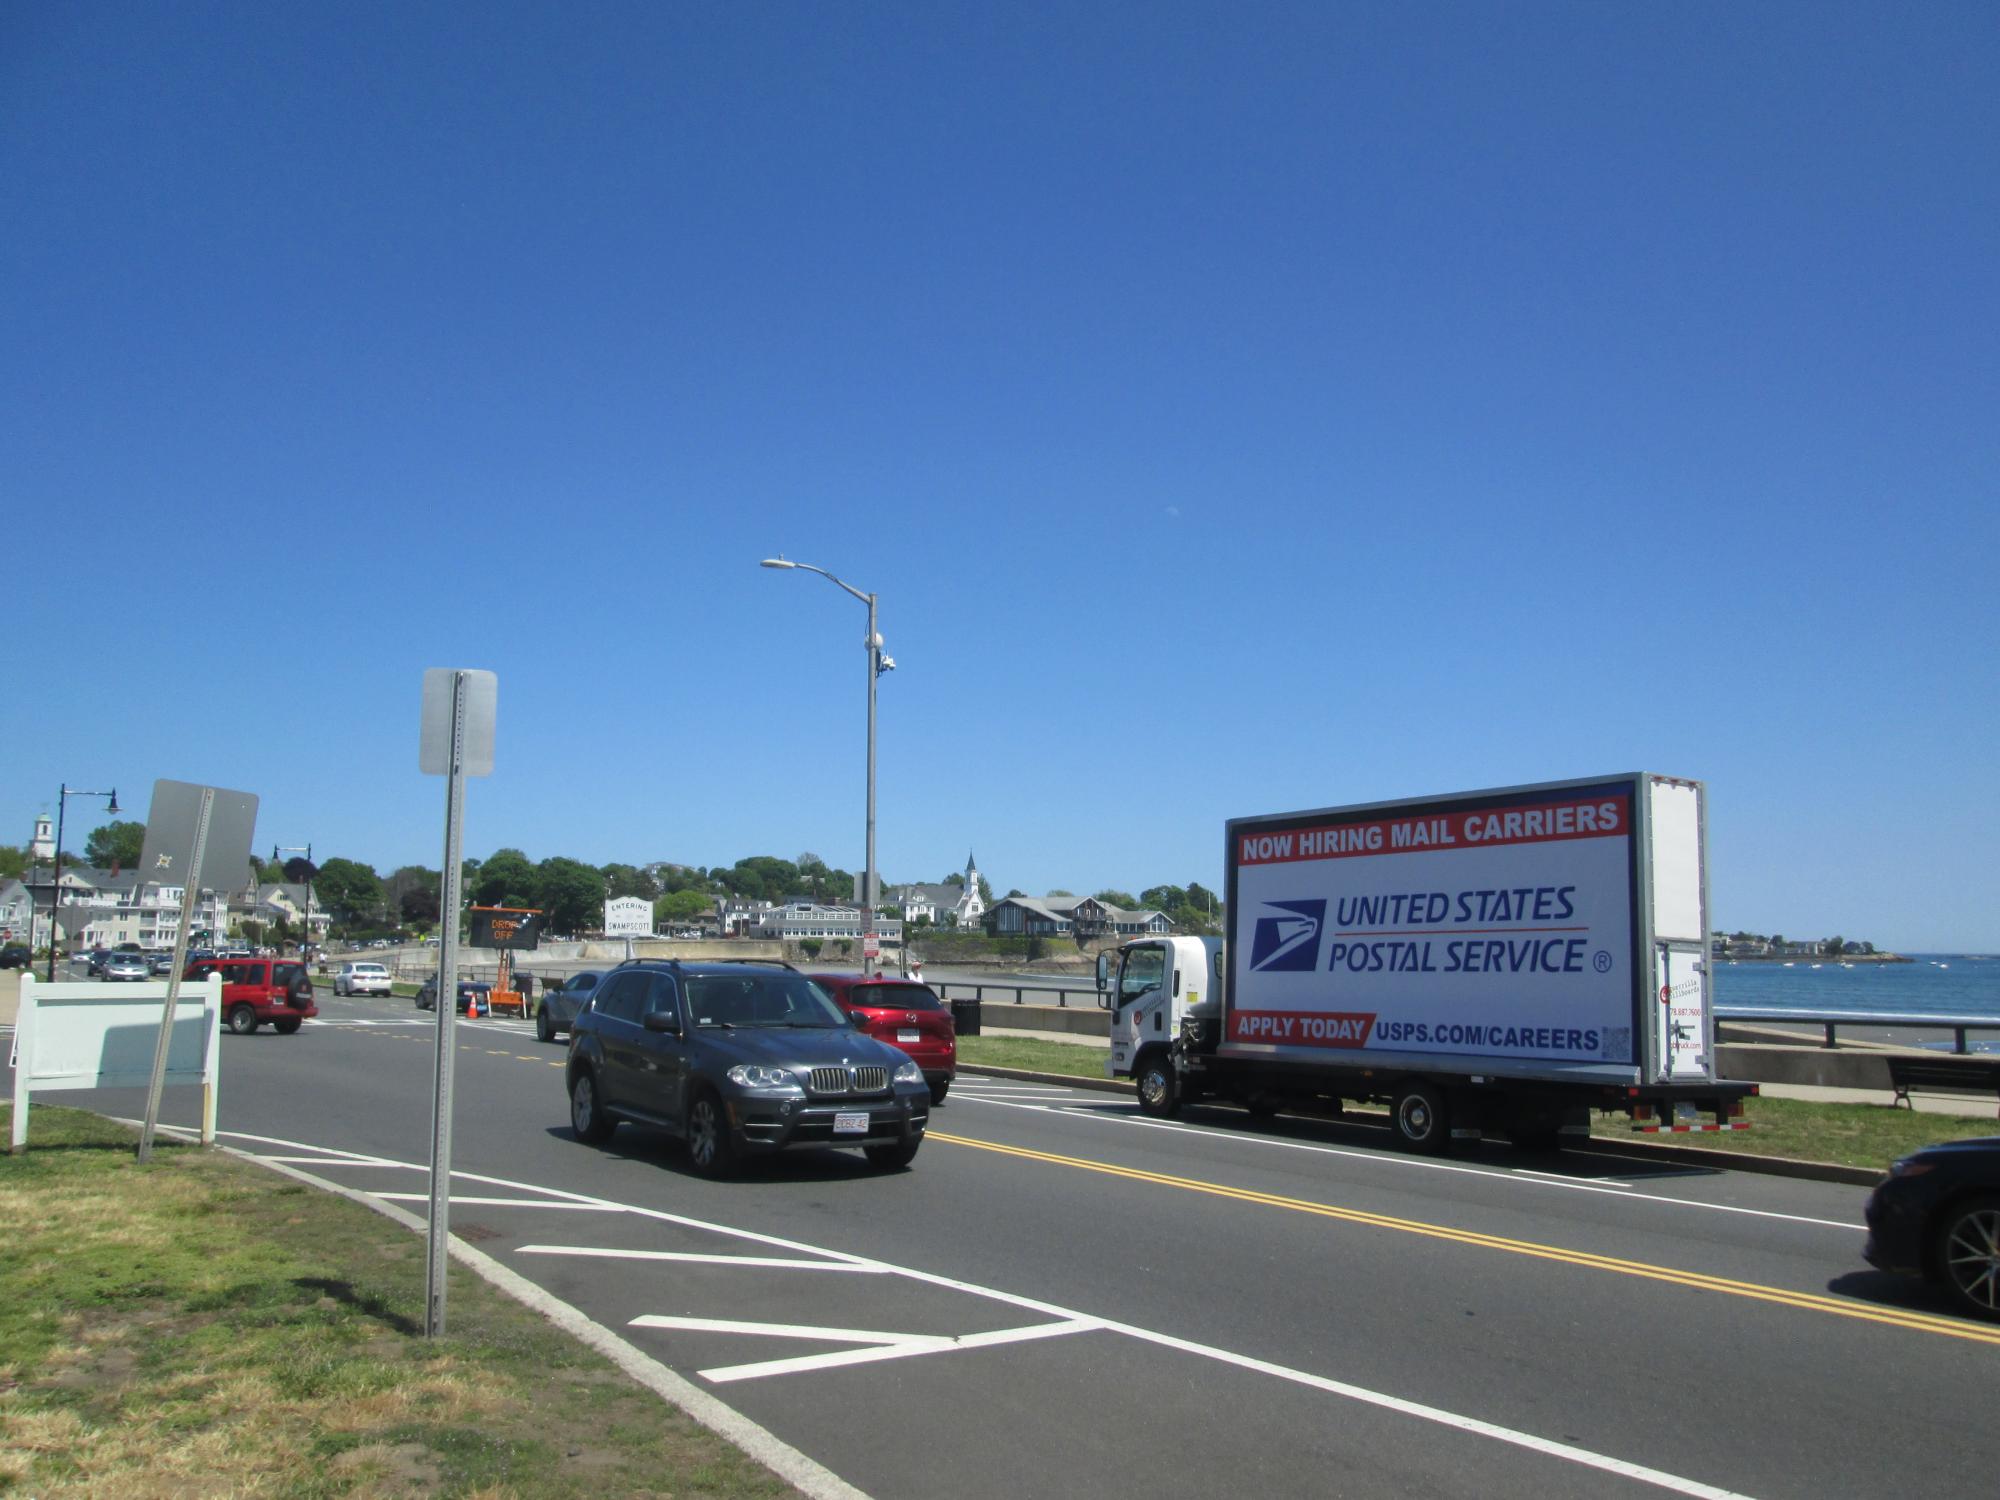 Mobile billboard truck stopped at King's Beach in Swampscott MA.